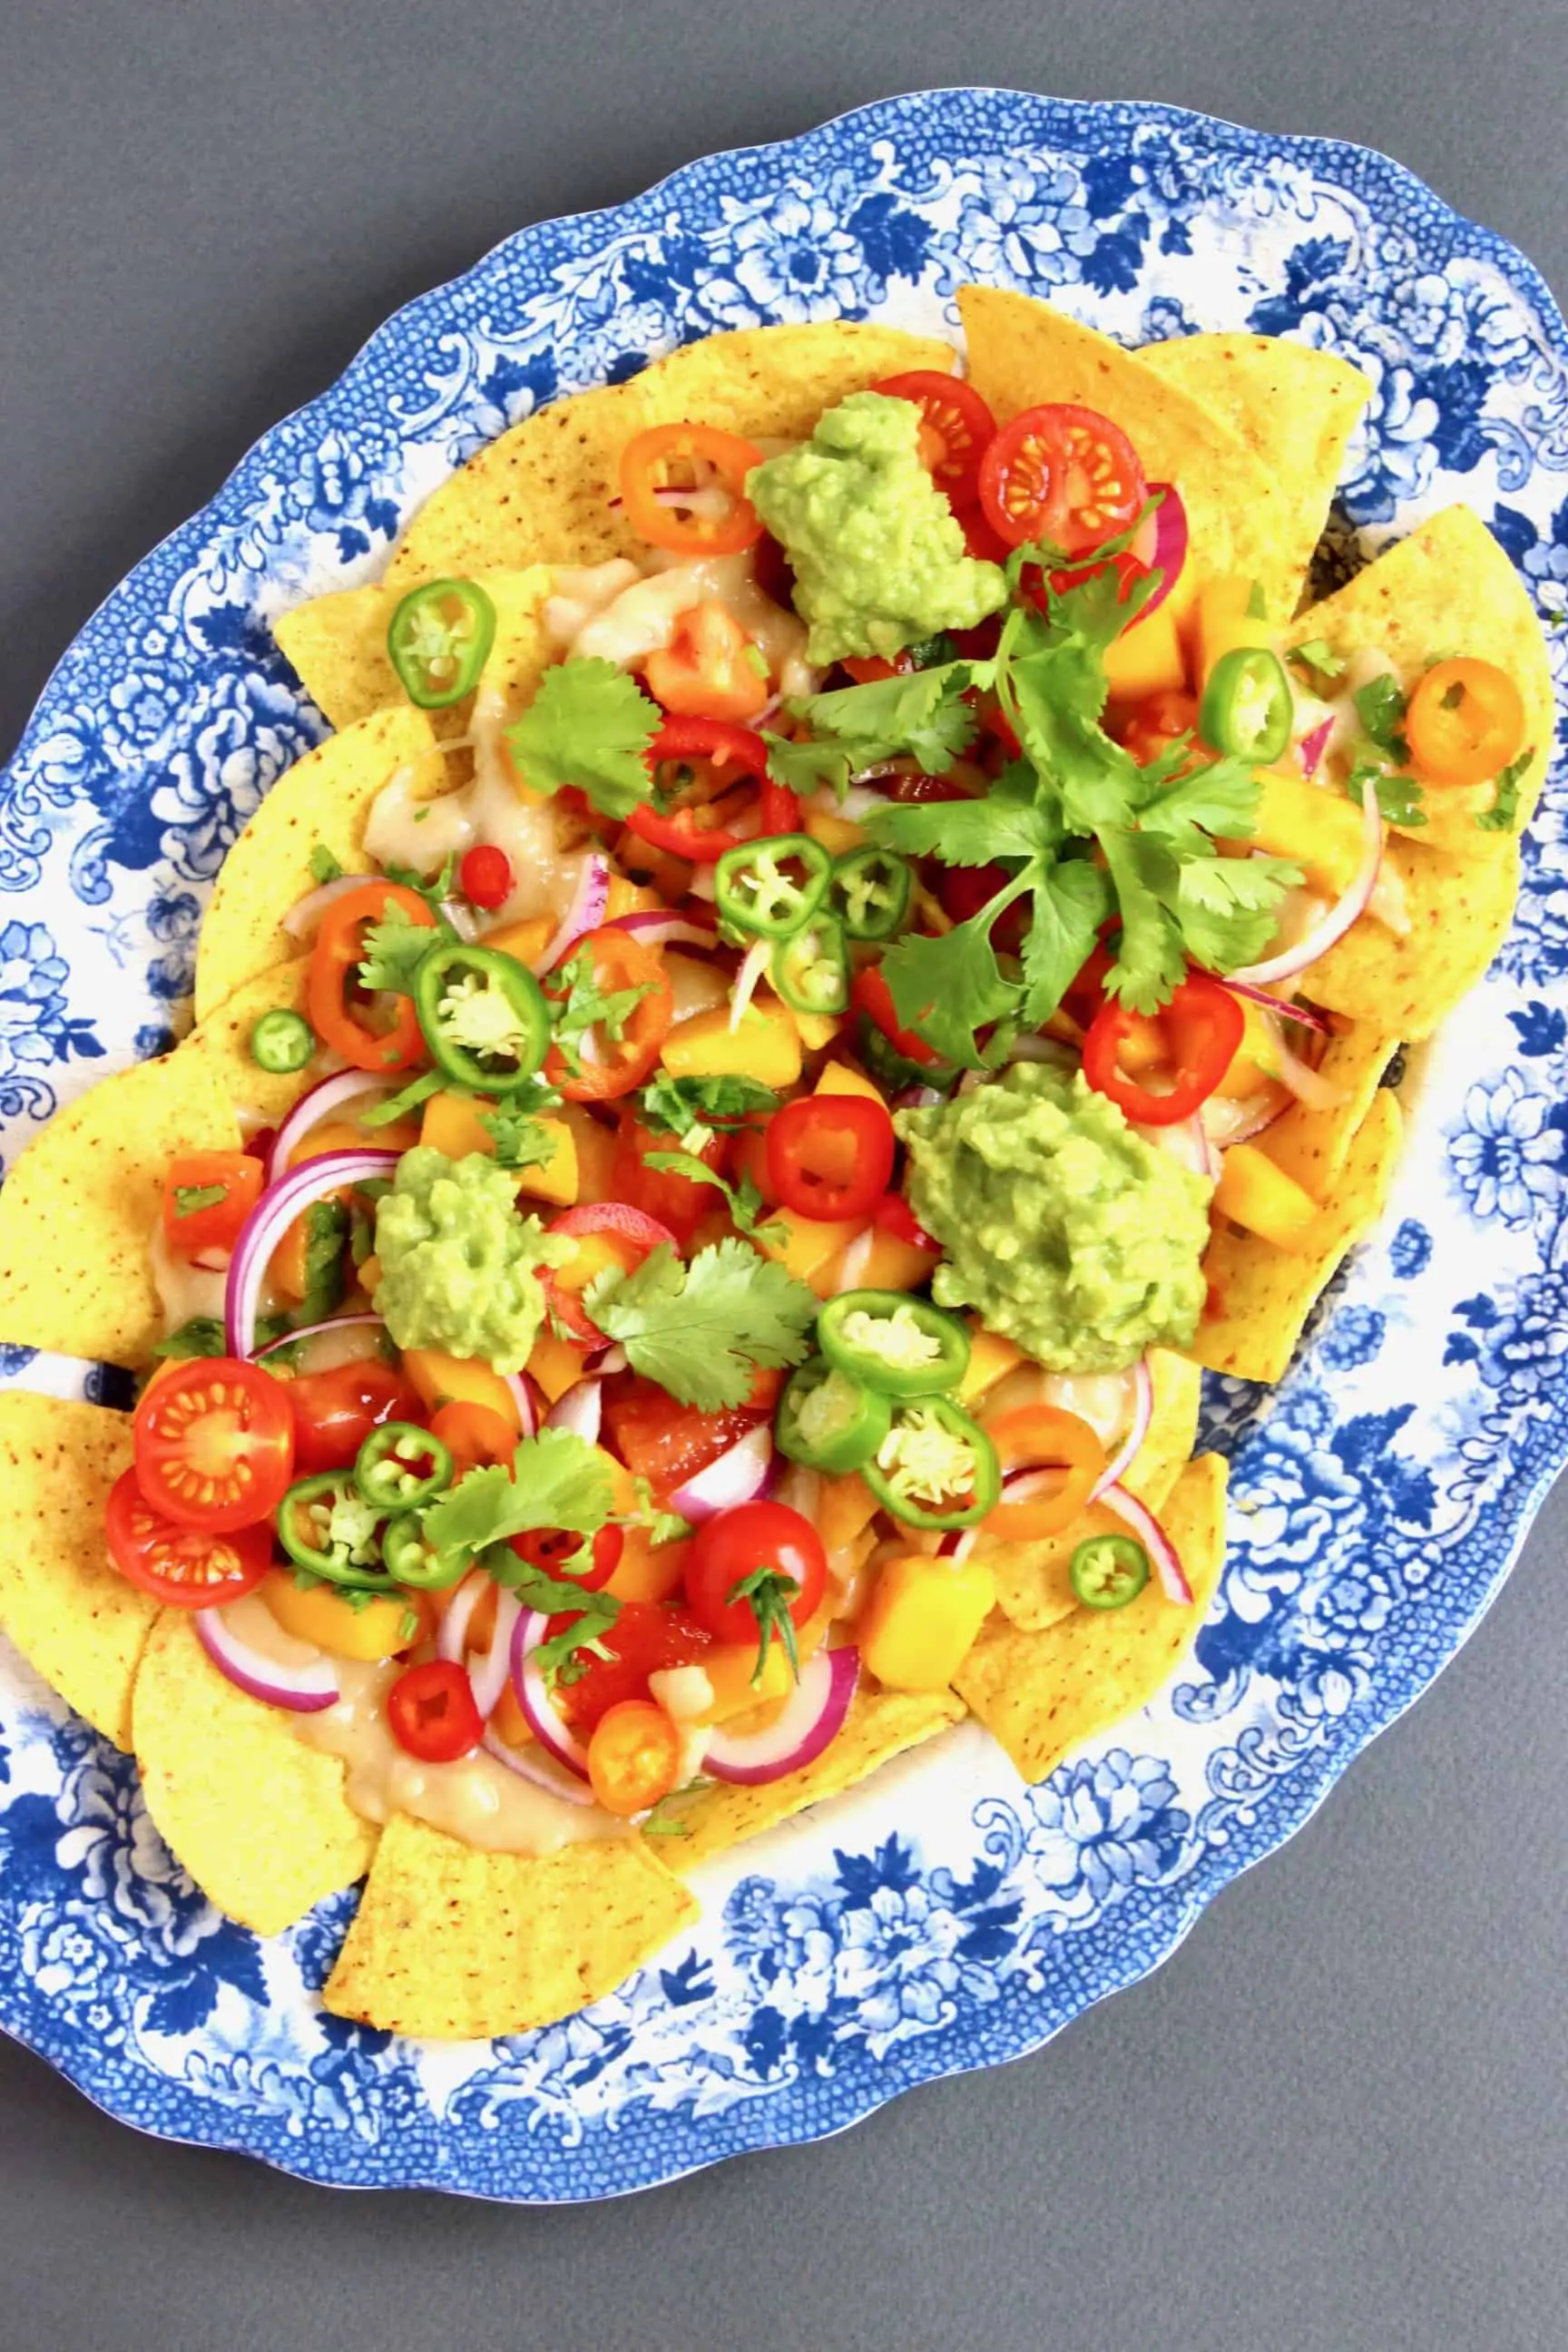 Nachos topped with lots of different vegetables on a oval blue plate against a grey background